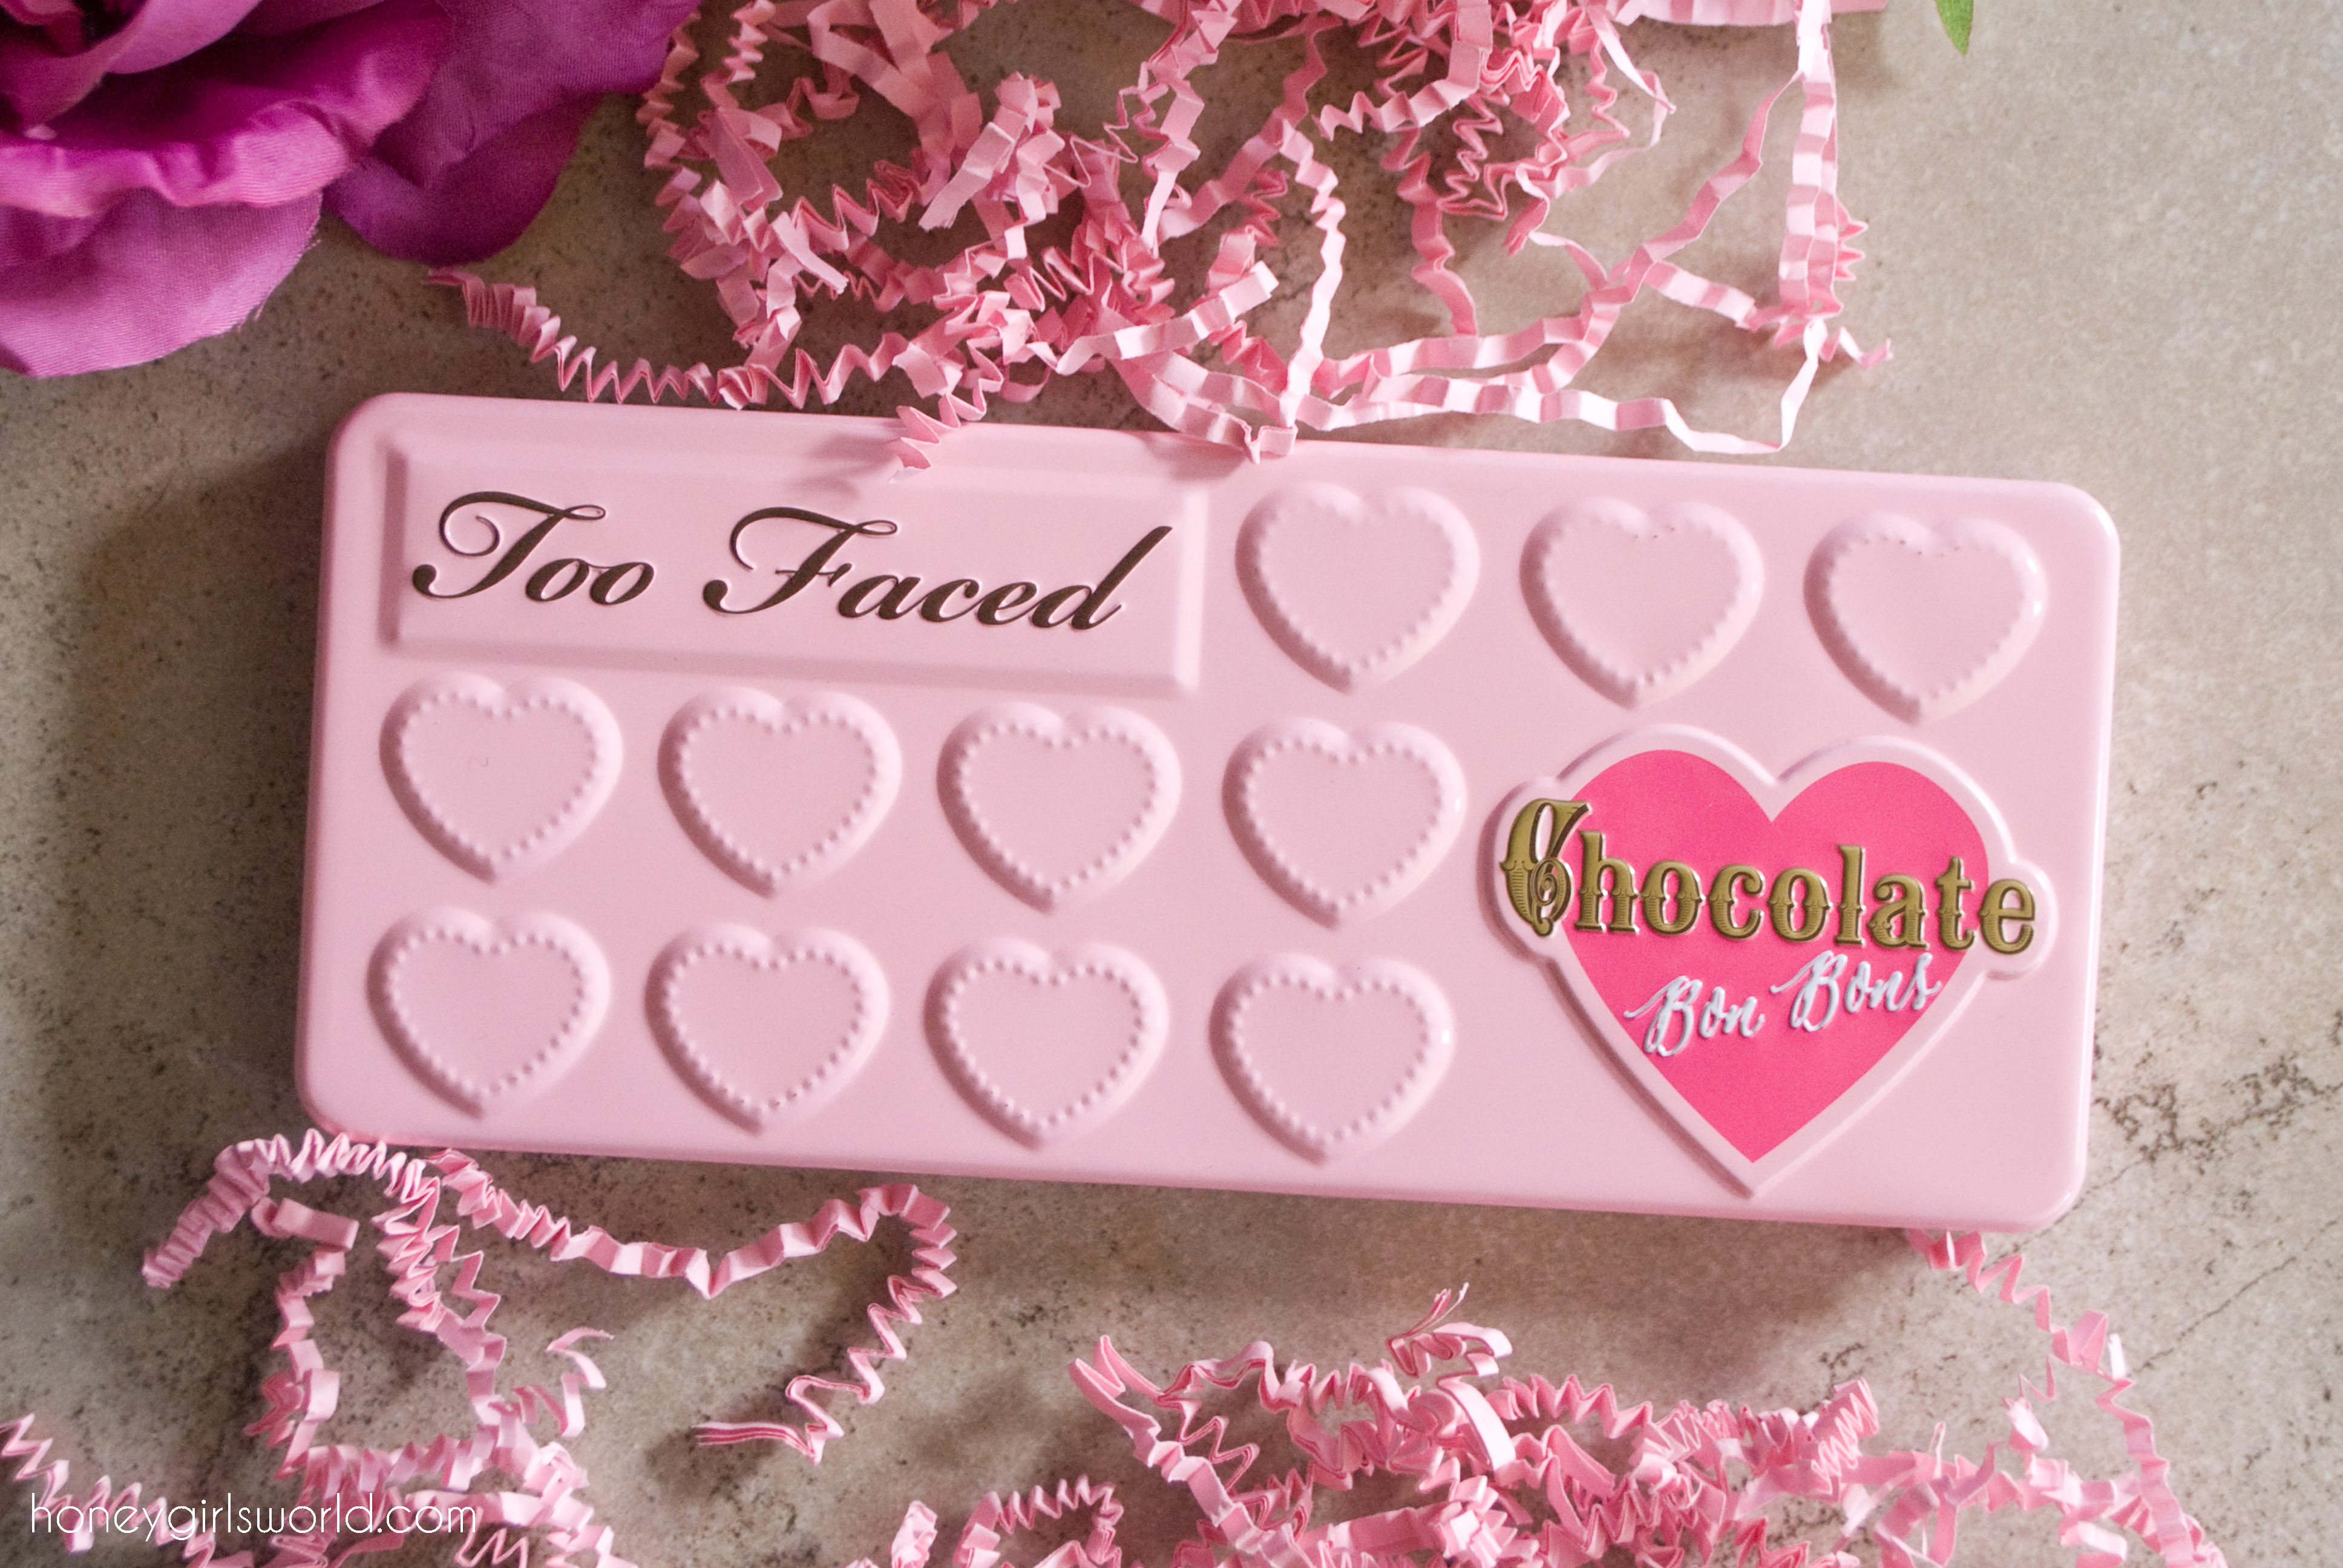 Too Faced Chocolate Bon Bons, Too Faced Chocolate bar, Too Faced, Bon Bons palette, review, beauty, palette, eye shadow palette,